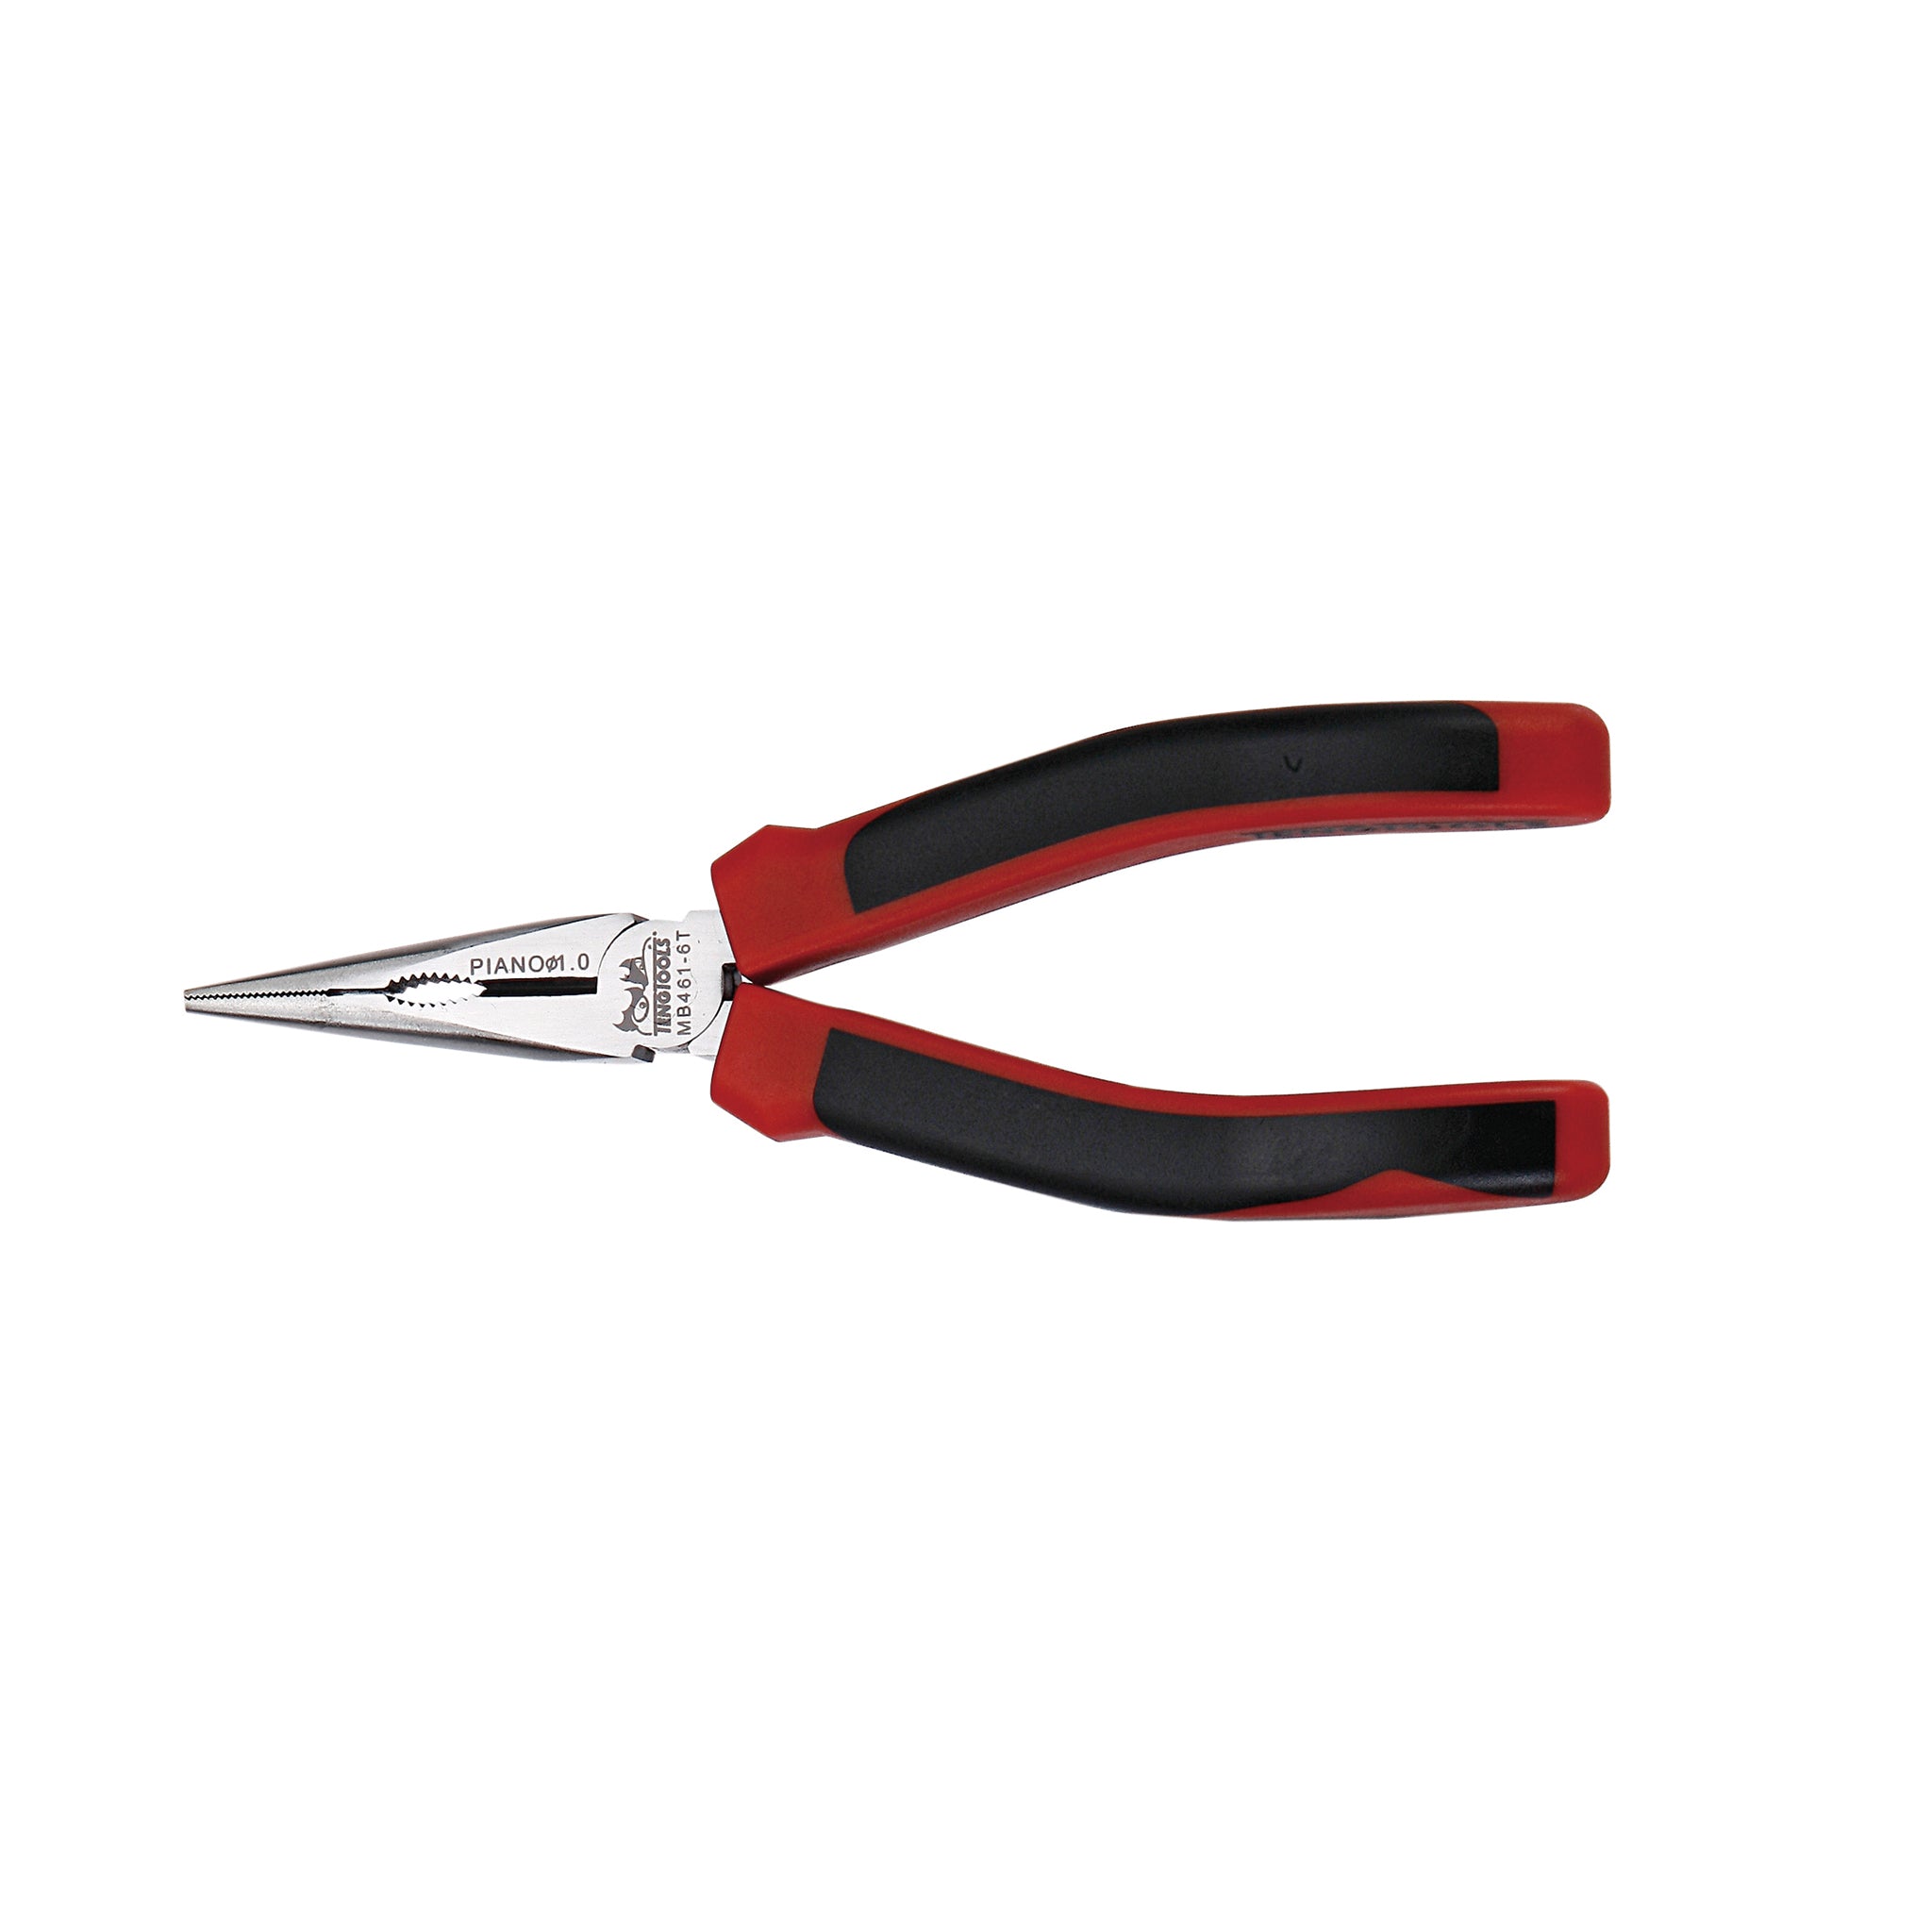 Teng Tools Long Nose Pliers With TPR Grip Handles